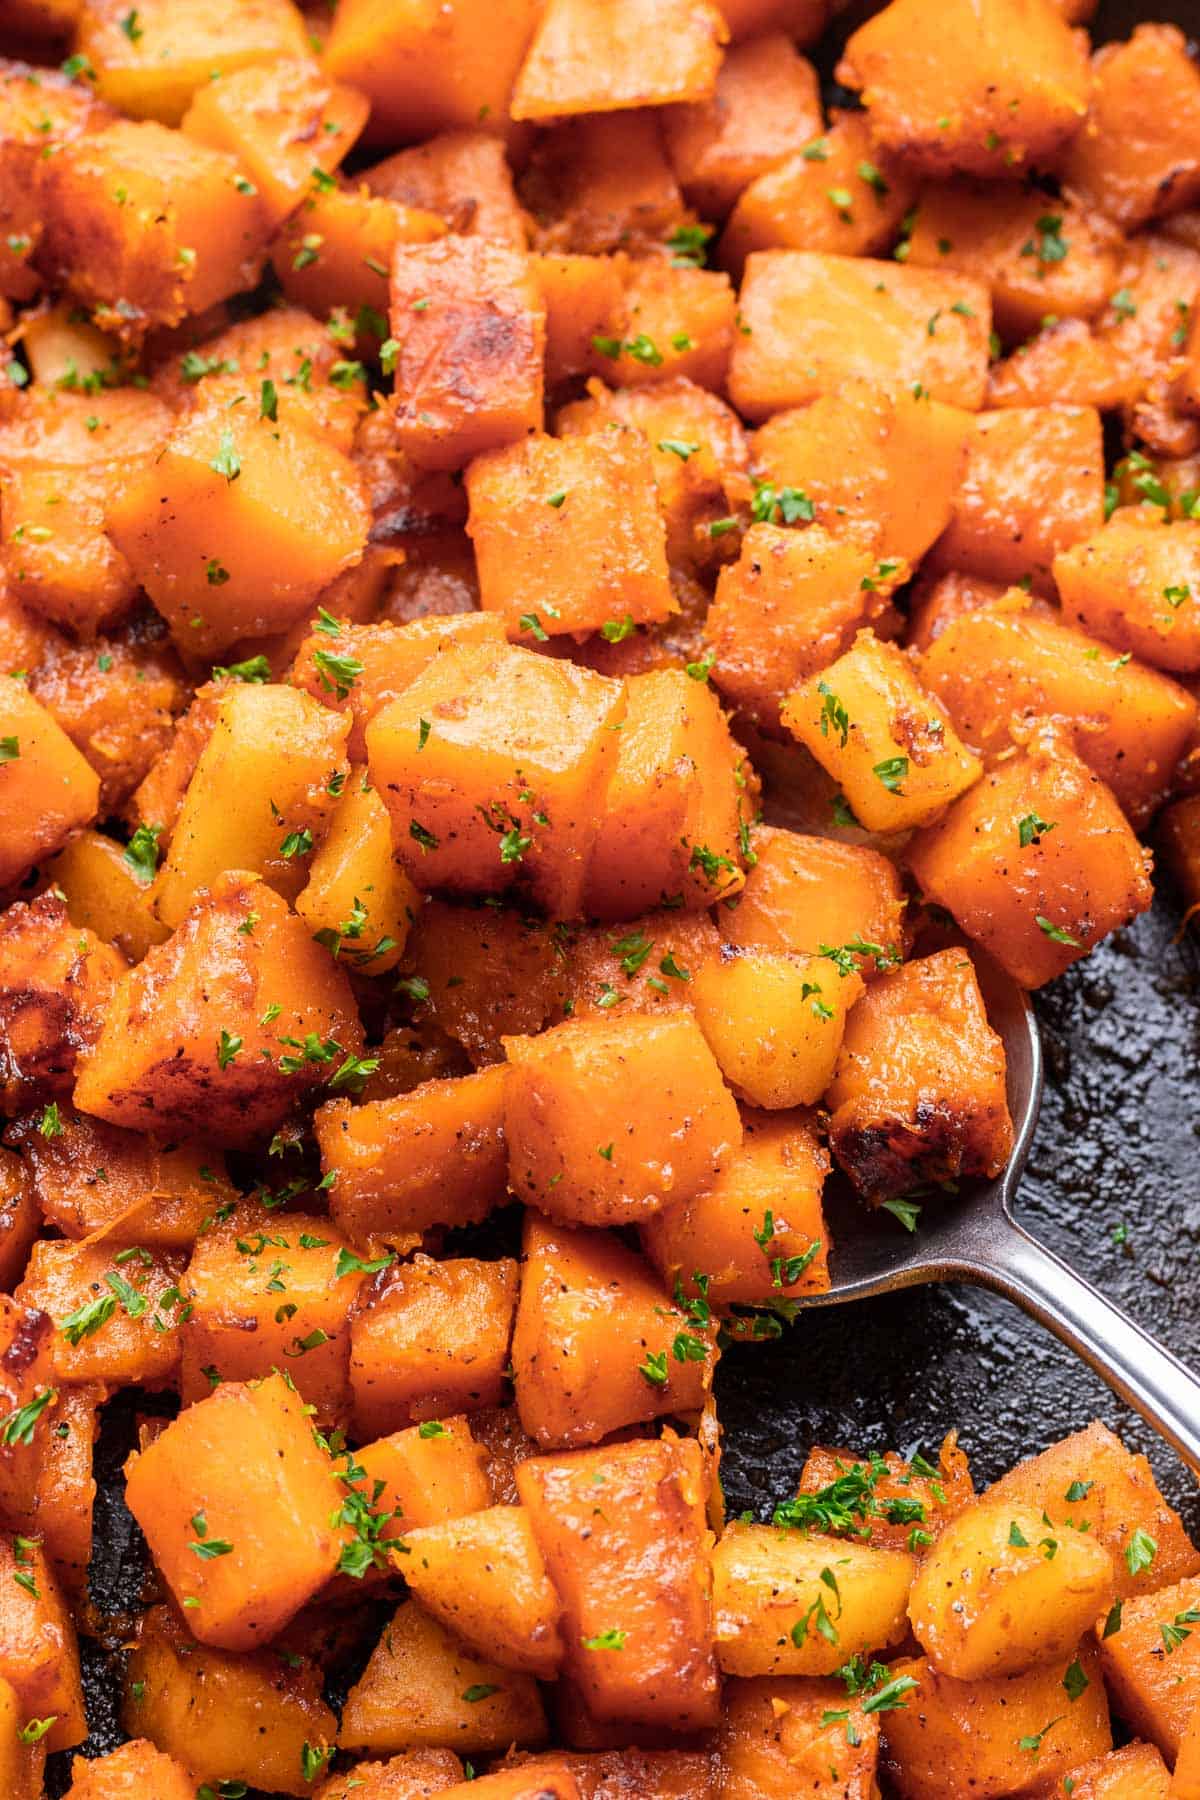 A serving spoon scooping sautéed butternut squash out of a skillet.